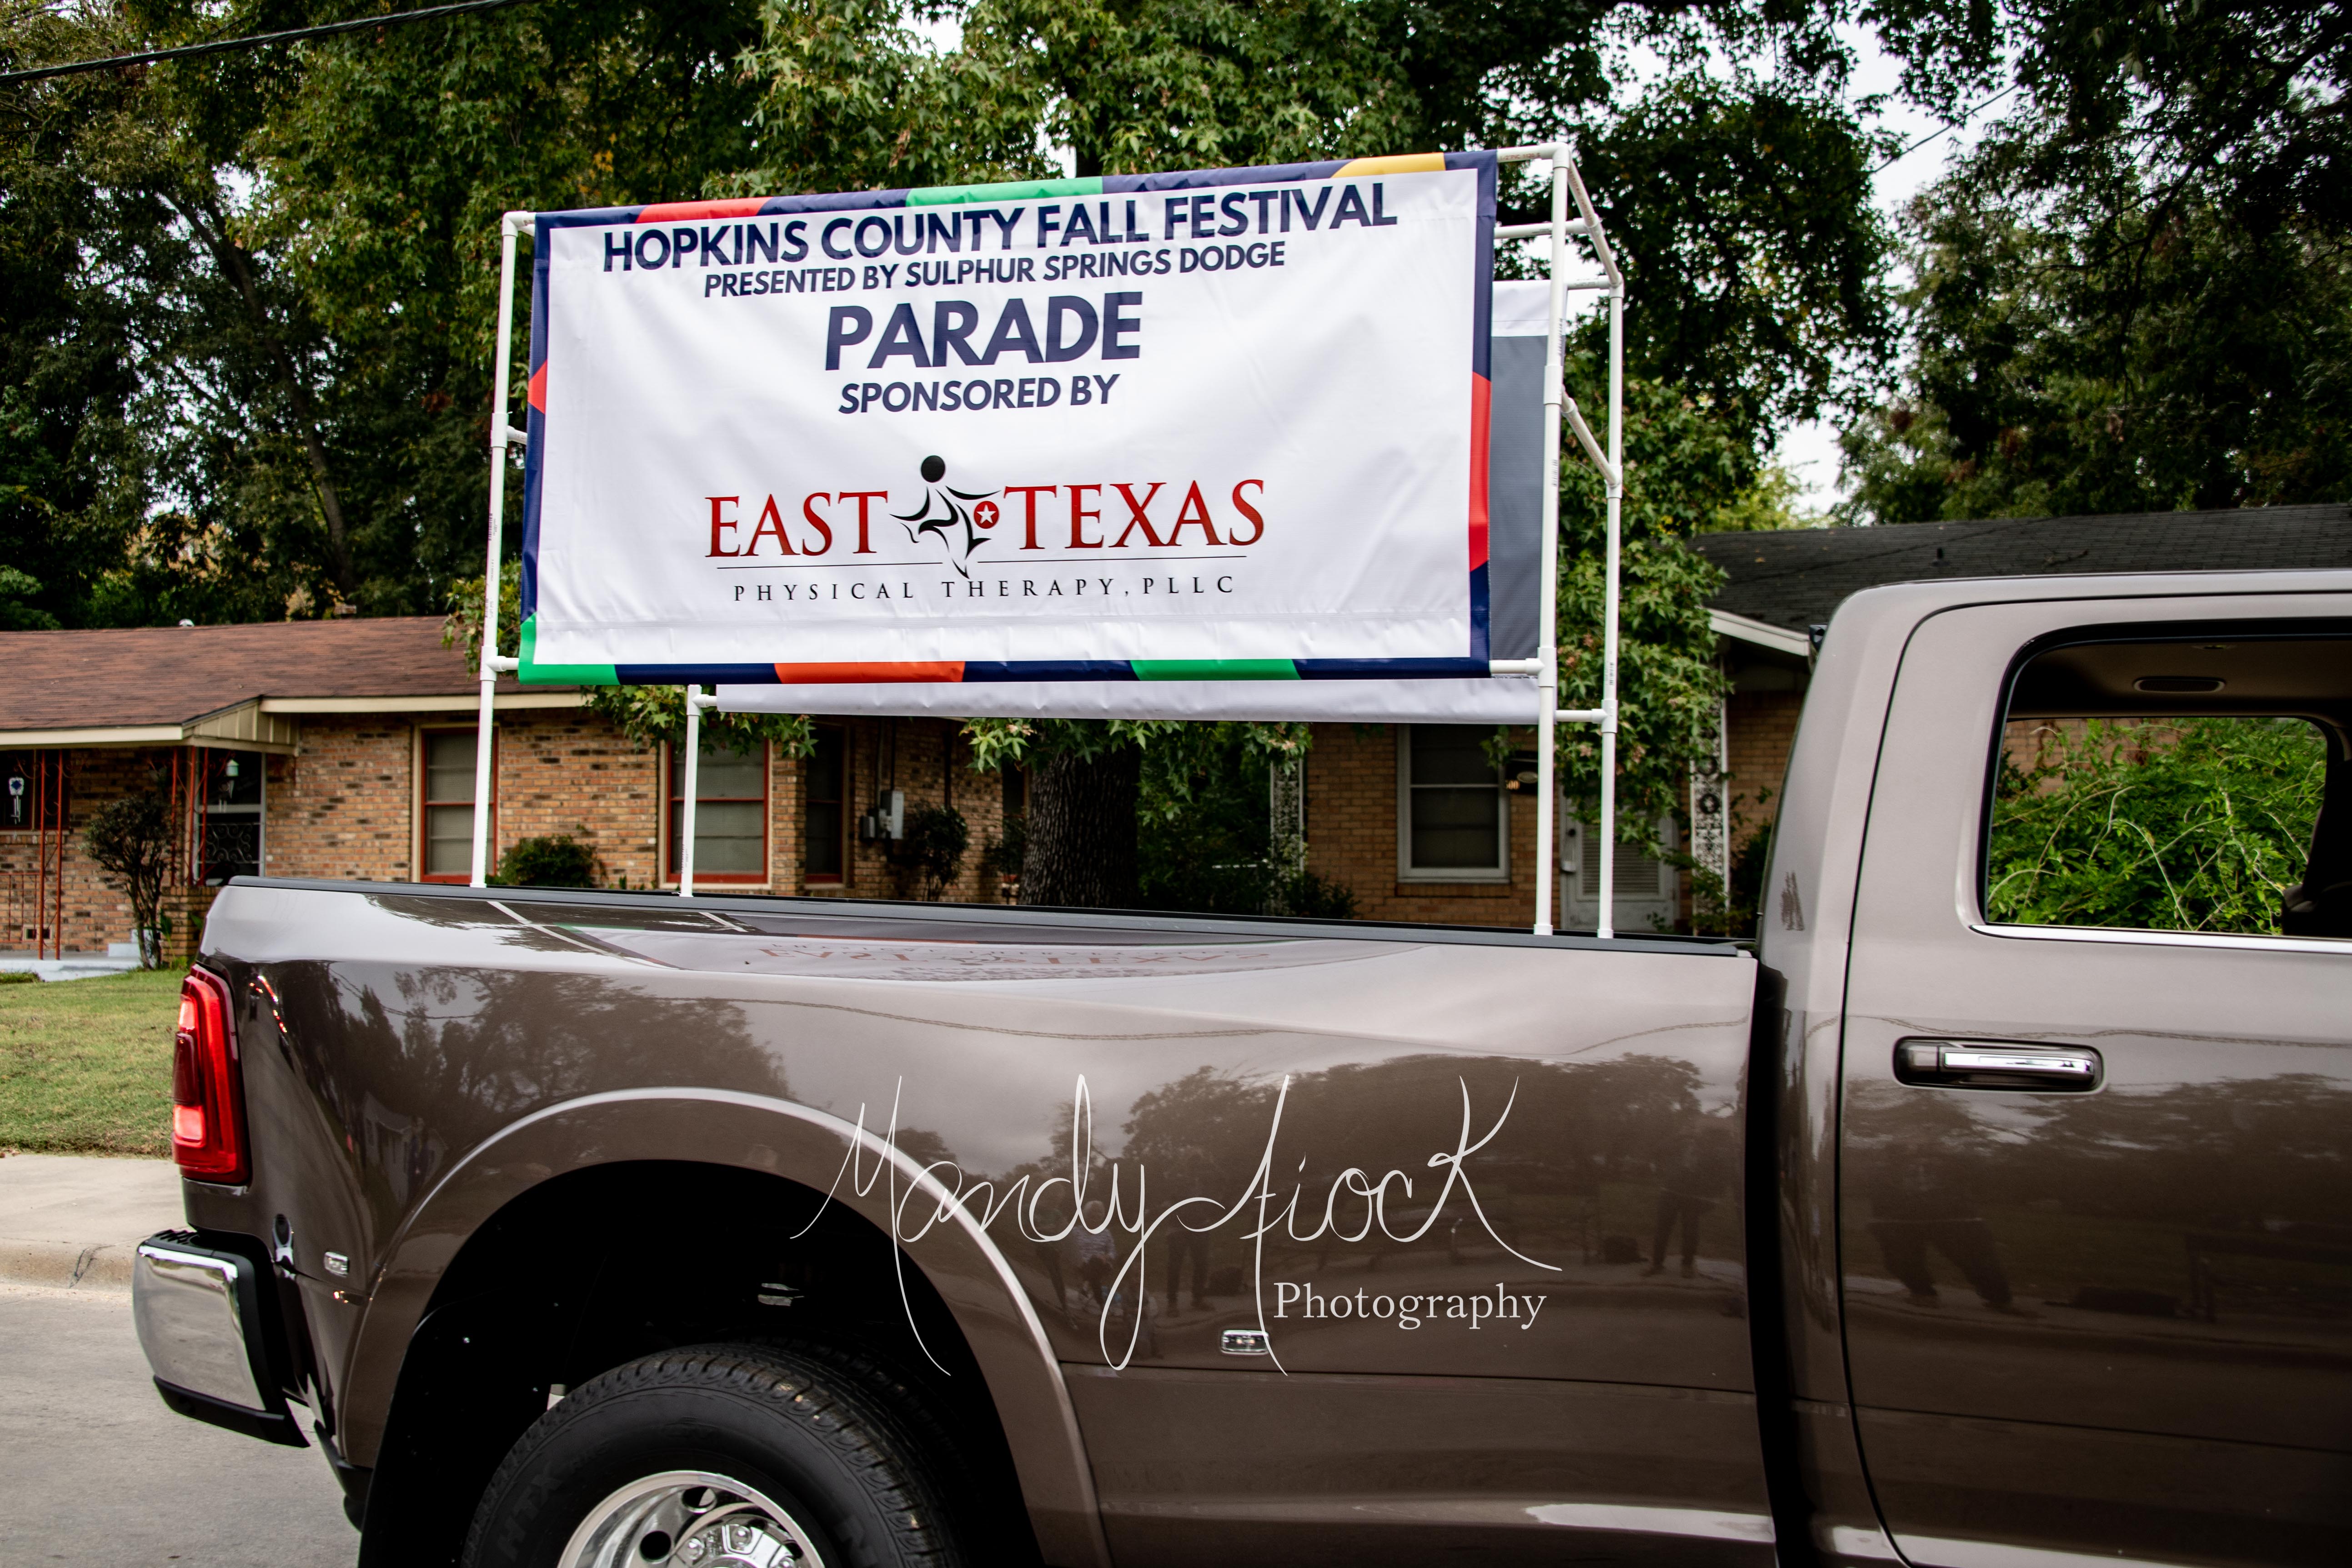 Photos from the 2019 Hopkins County Fall Festival Parade by Mandy Fiock Photography!